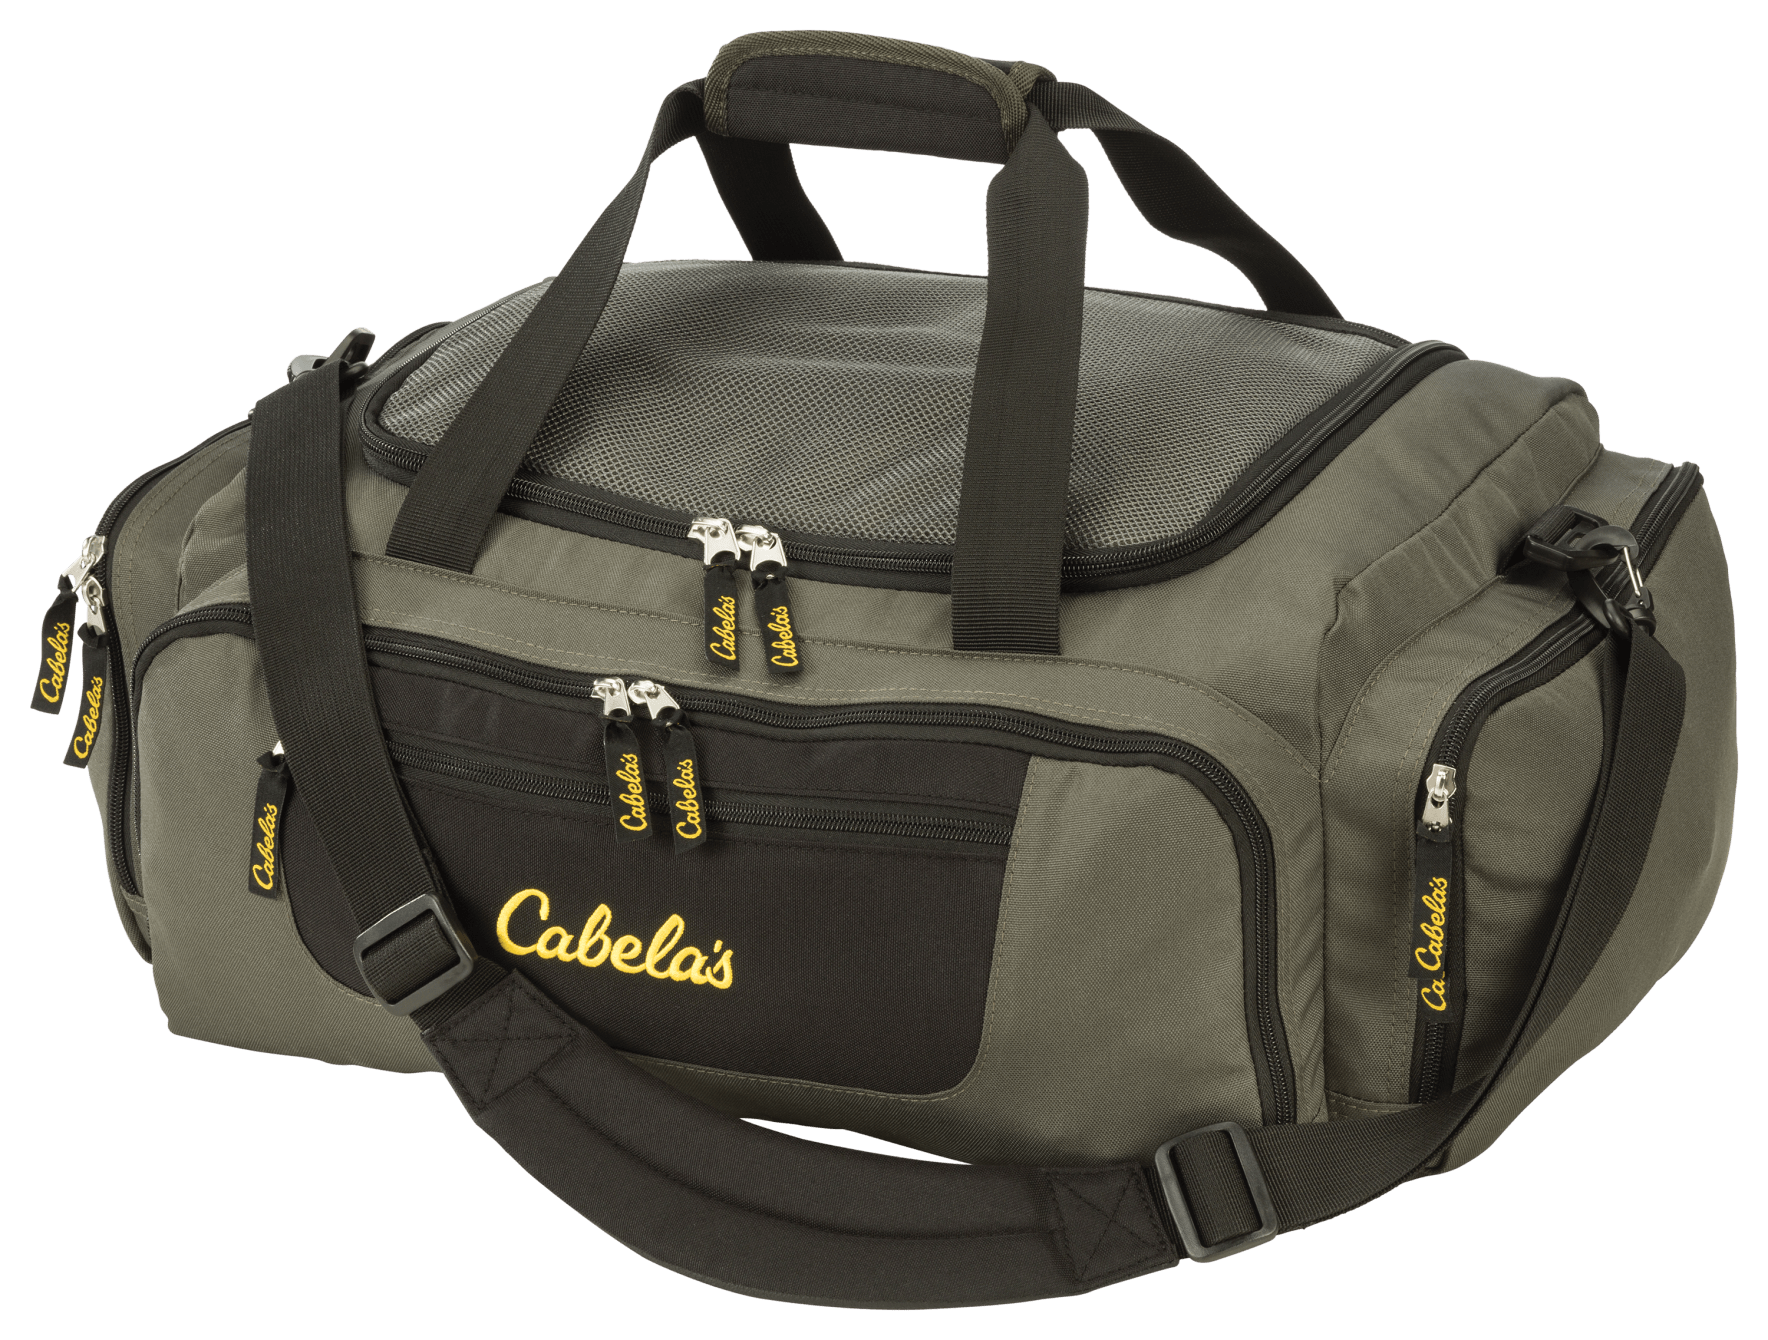 Cabela's Carryall Bag-Gray - gifts for outdoorsy dads